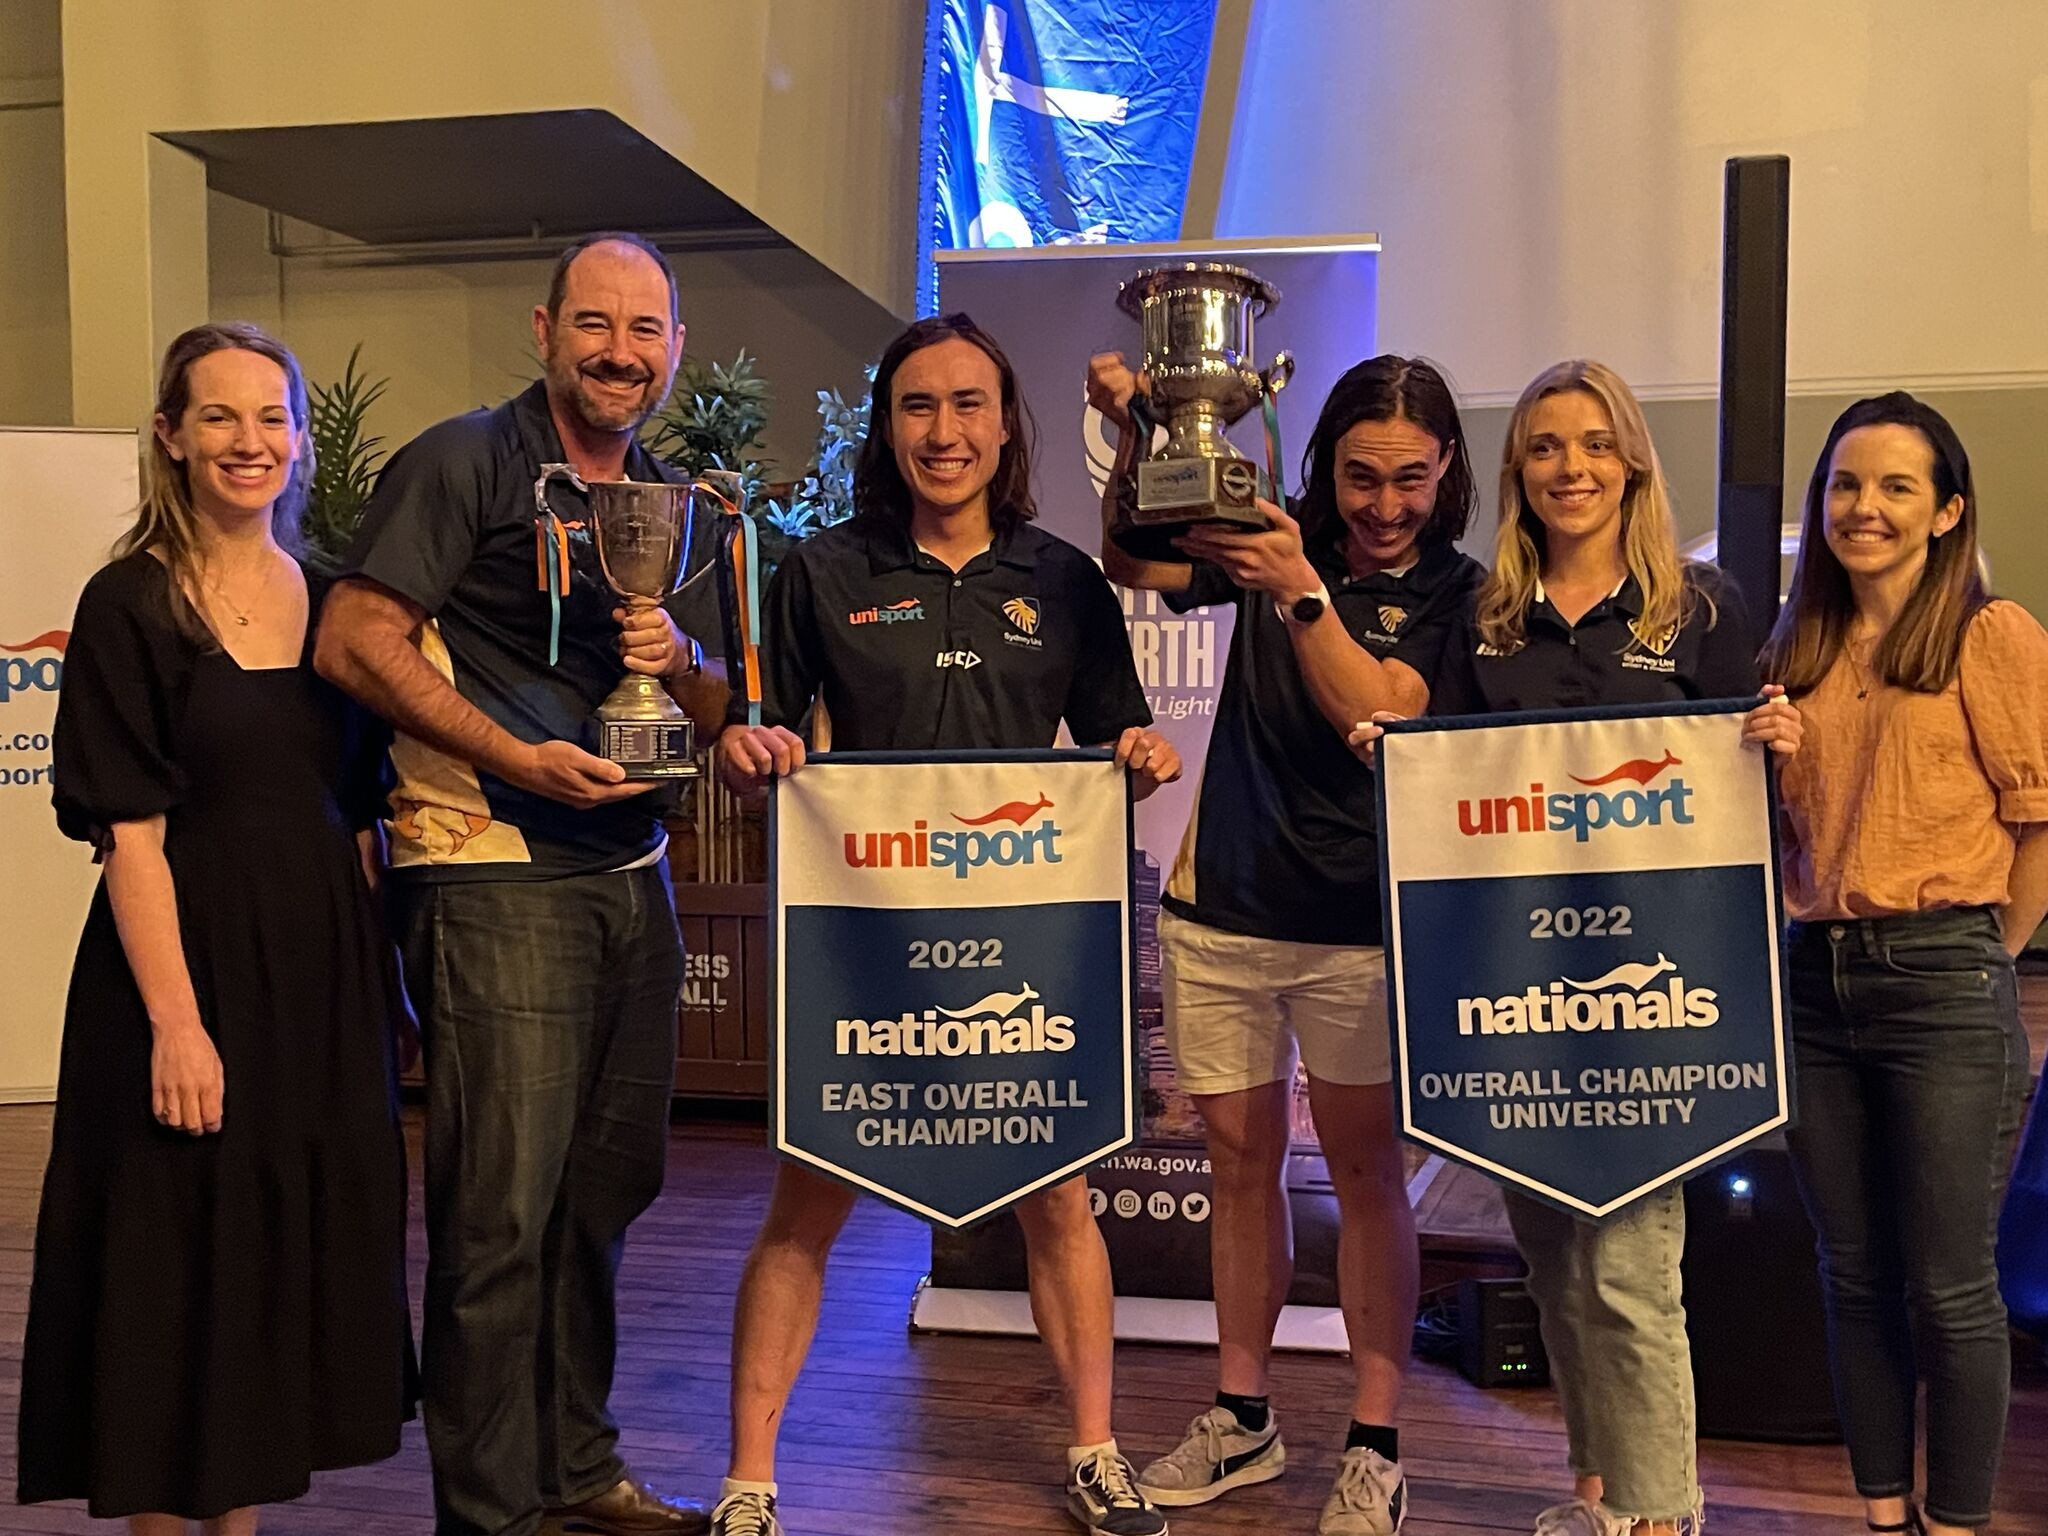 The University of Sydney has won the 2022 national championship after topping the table with 16 pennants ©UniSport Australia/LinkedIn 